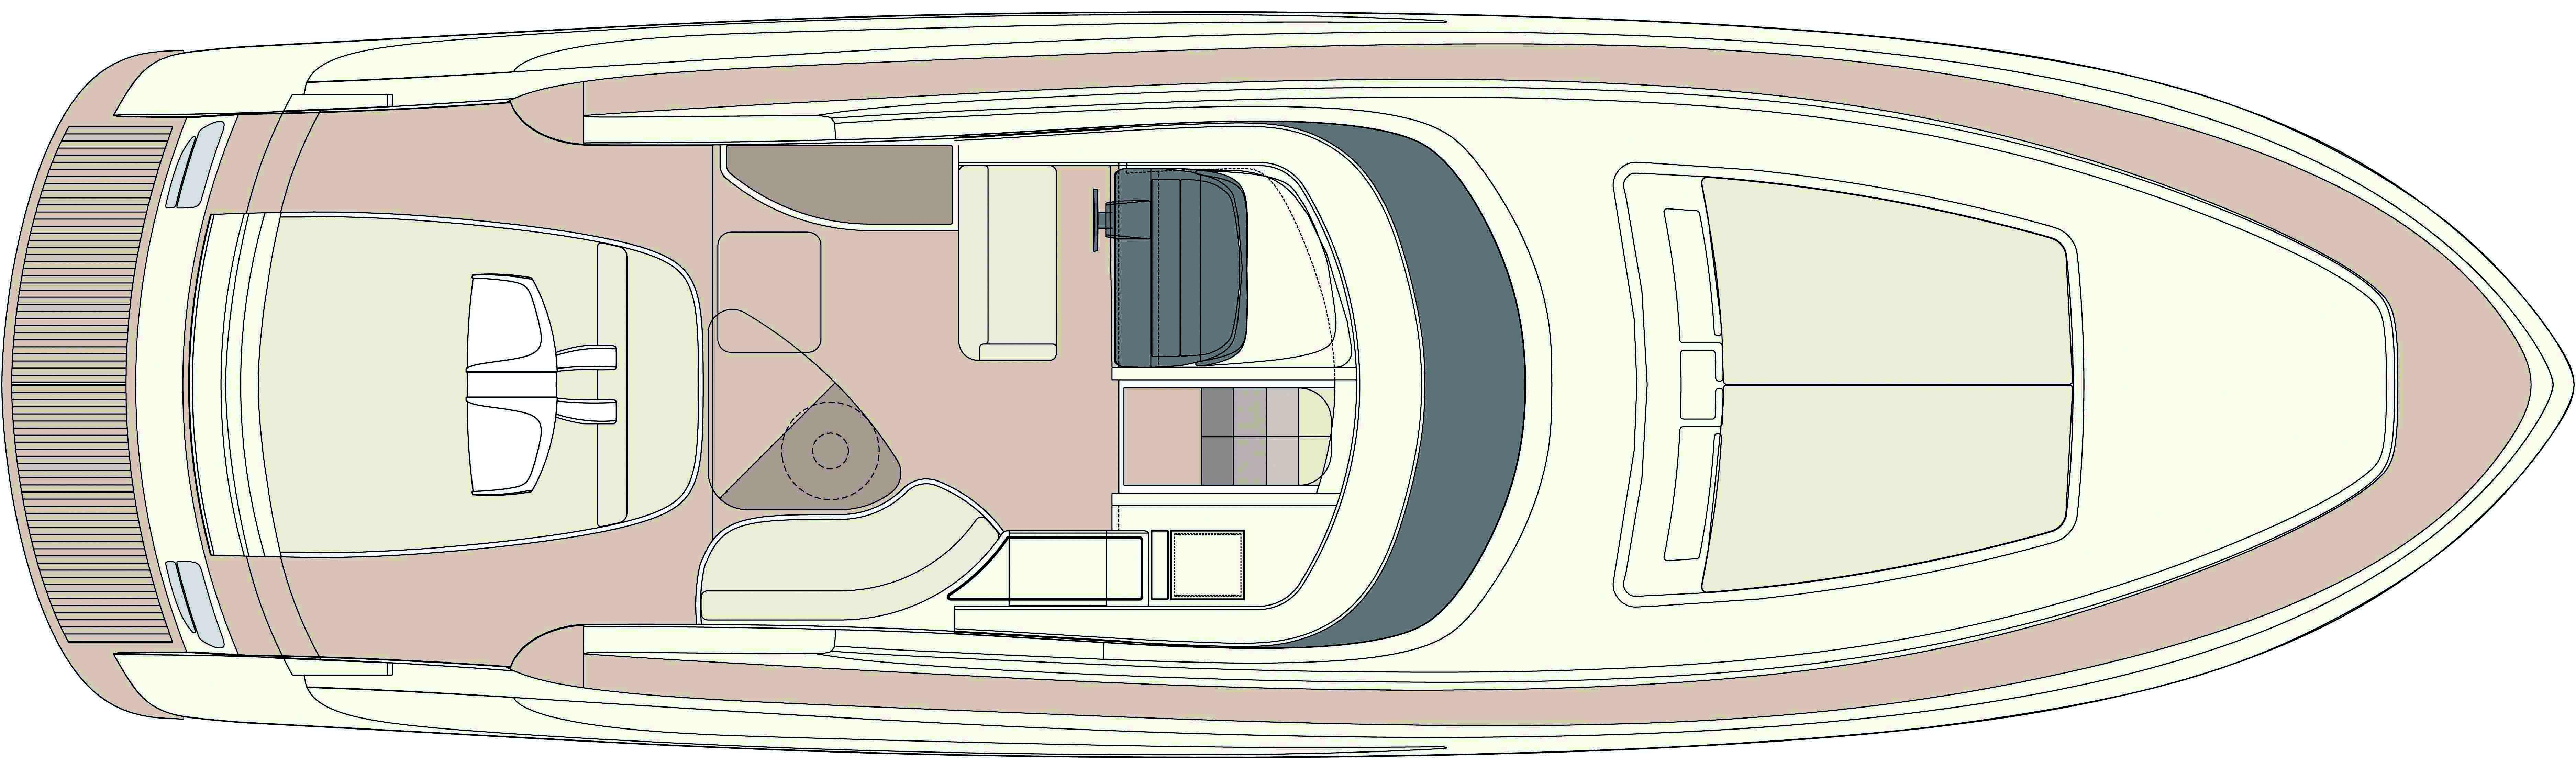 Manufacturer Provided Image: Riva Rivale Upper Deck Layout Plan